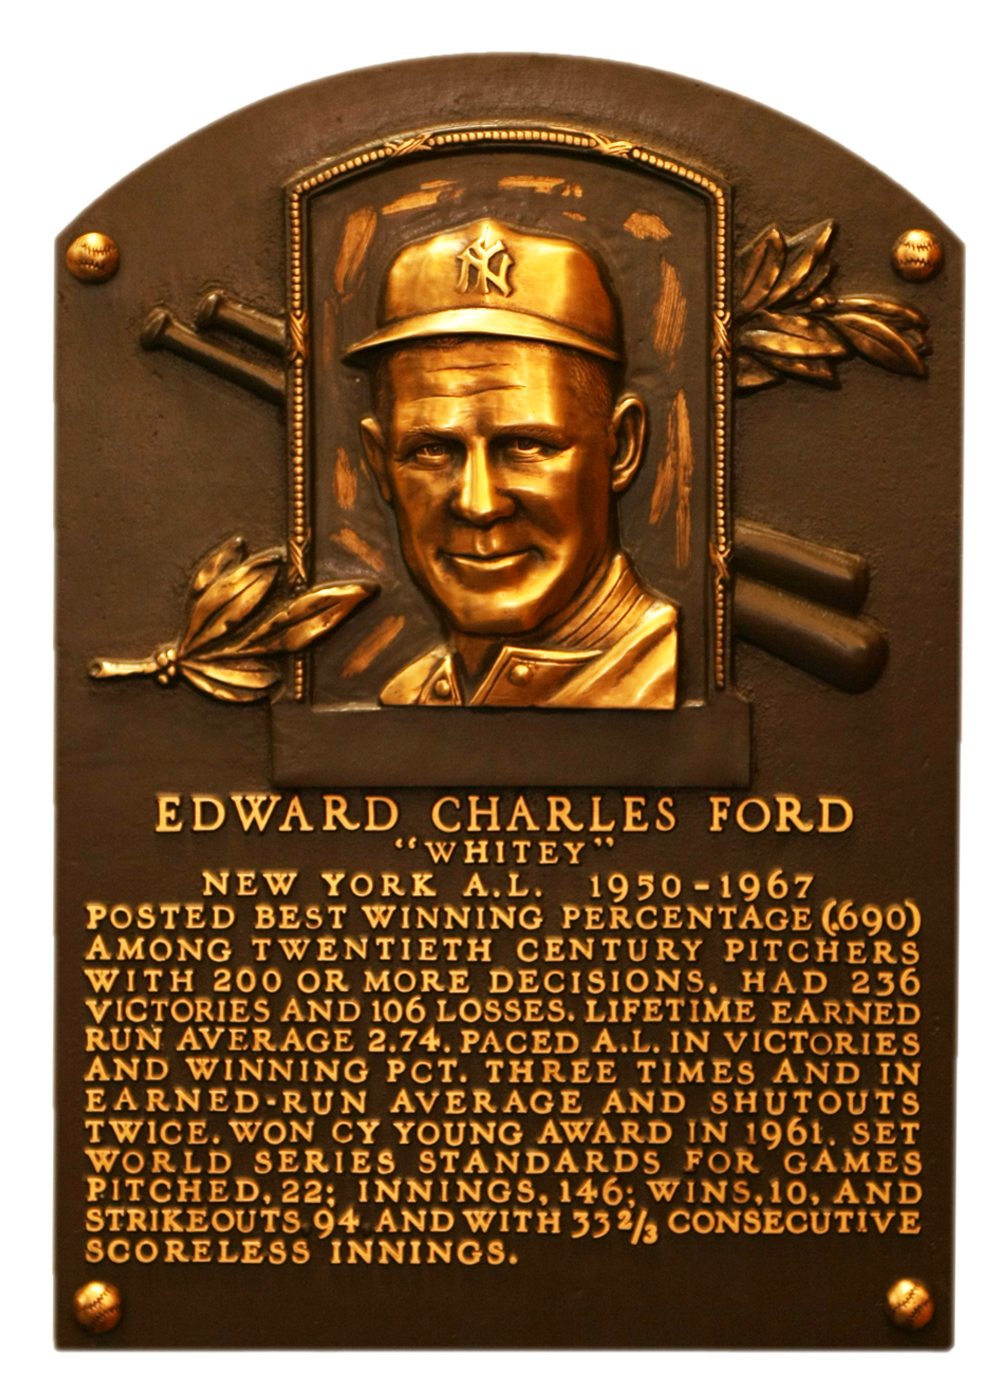 Whitey Ford Hall of Fame plaque